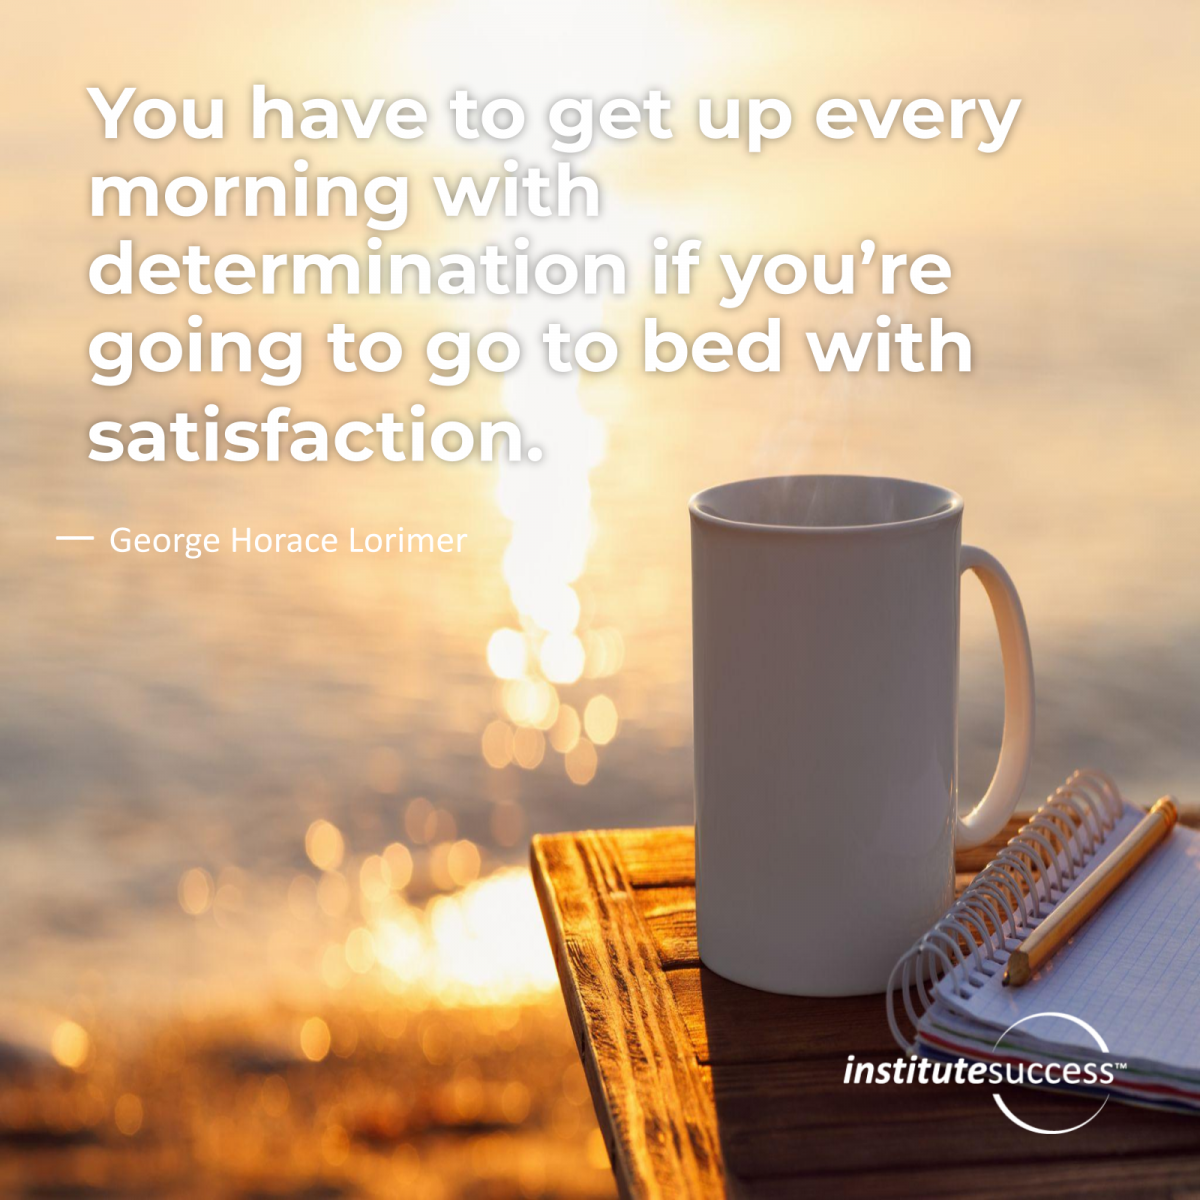 You have got to get up every morning with determination if you’re going to go to bed with satisfaction.	George Horace Lorimer